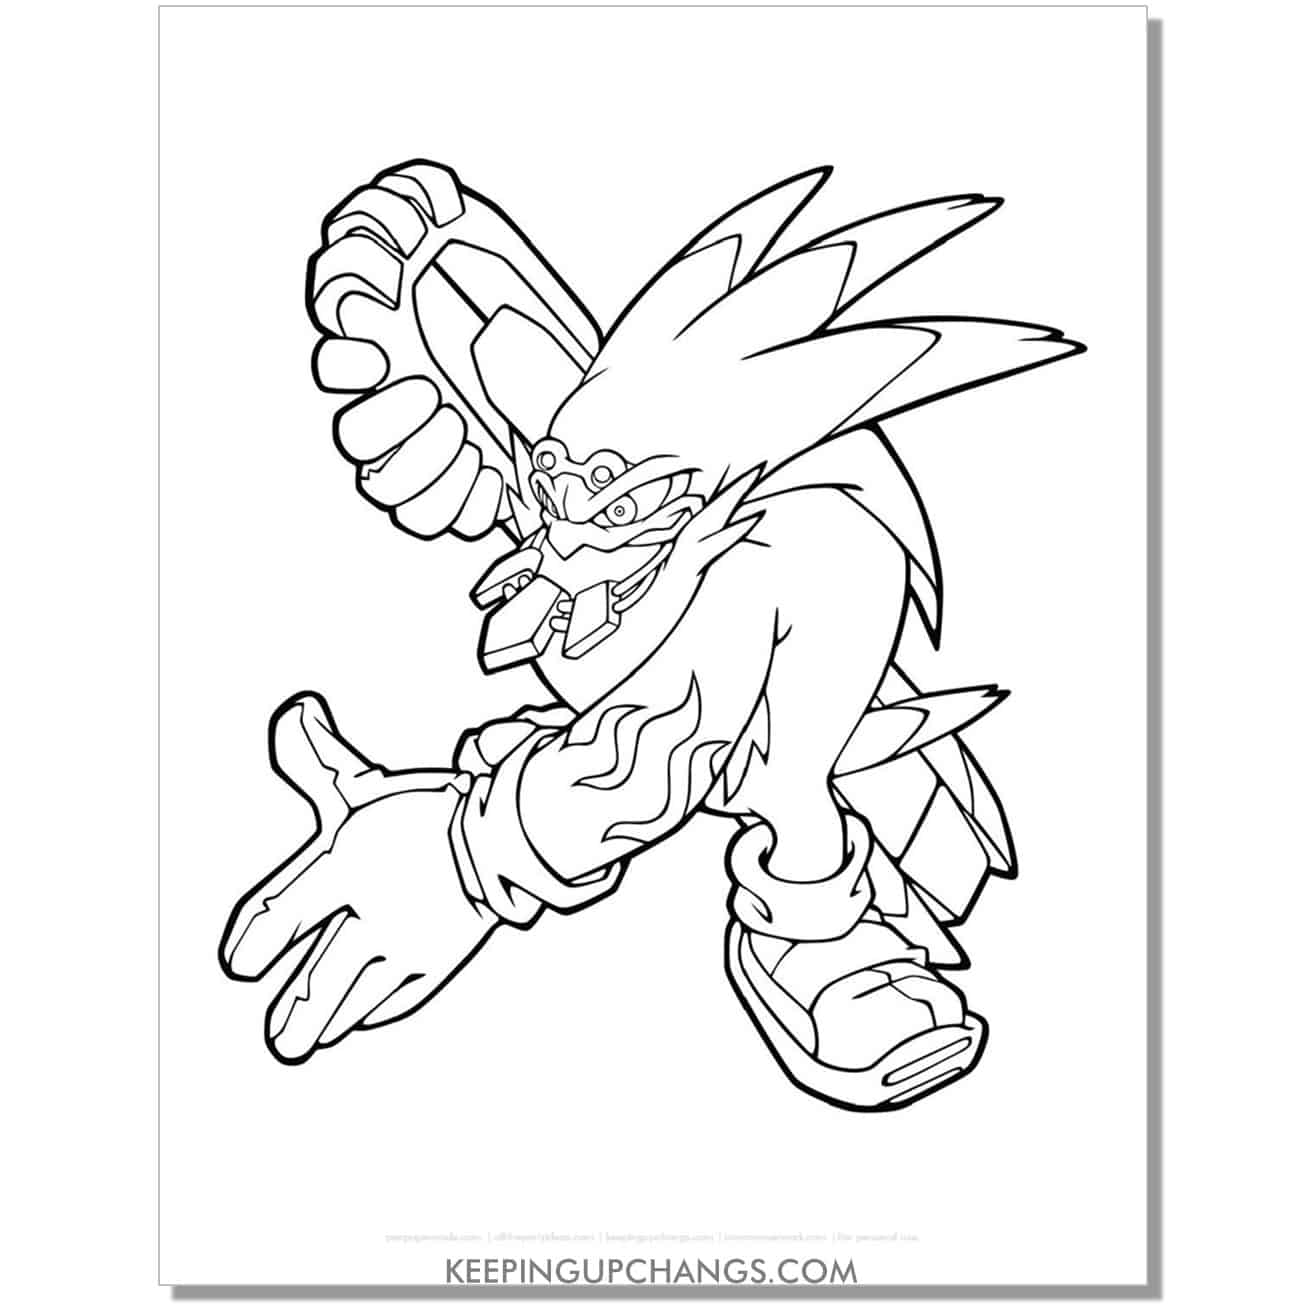 storm albatross sonic coloring page.